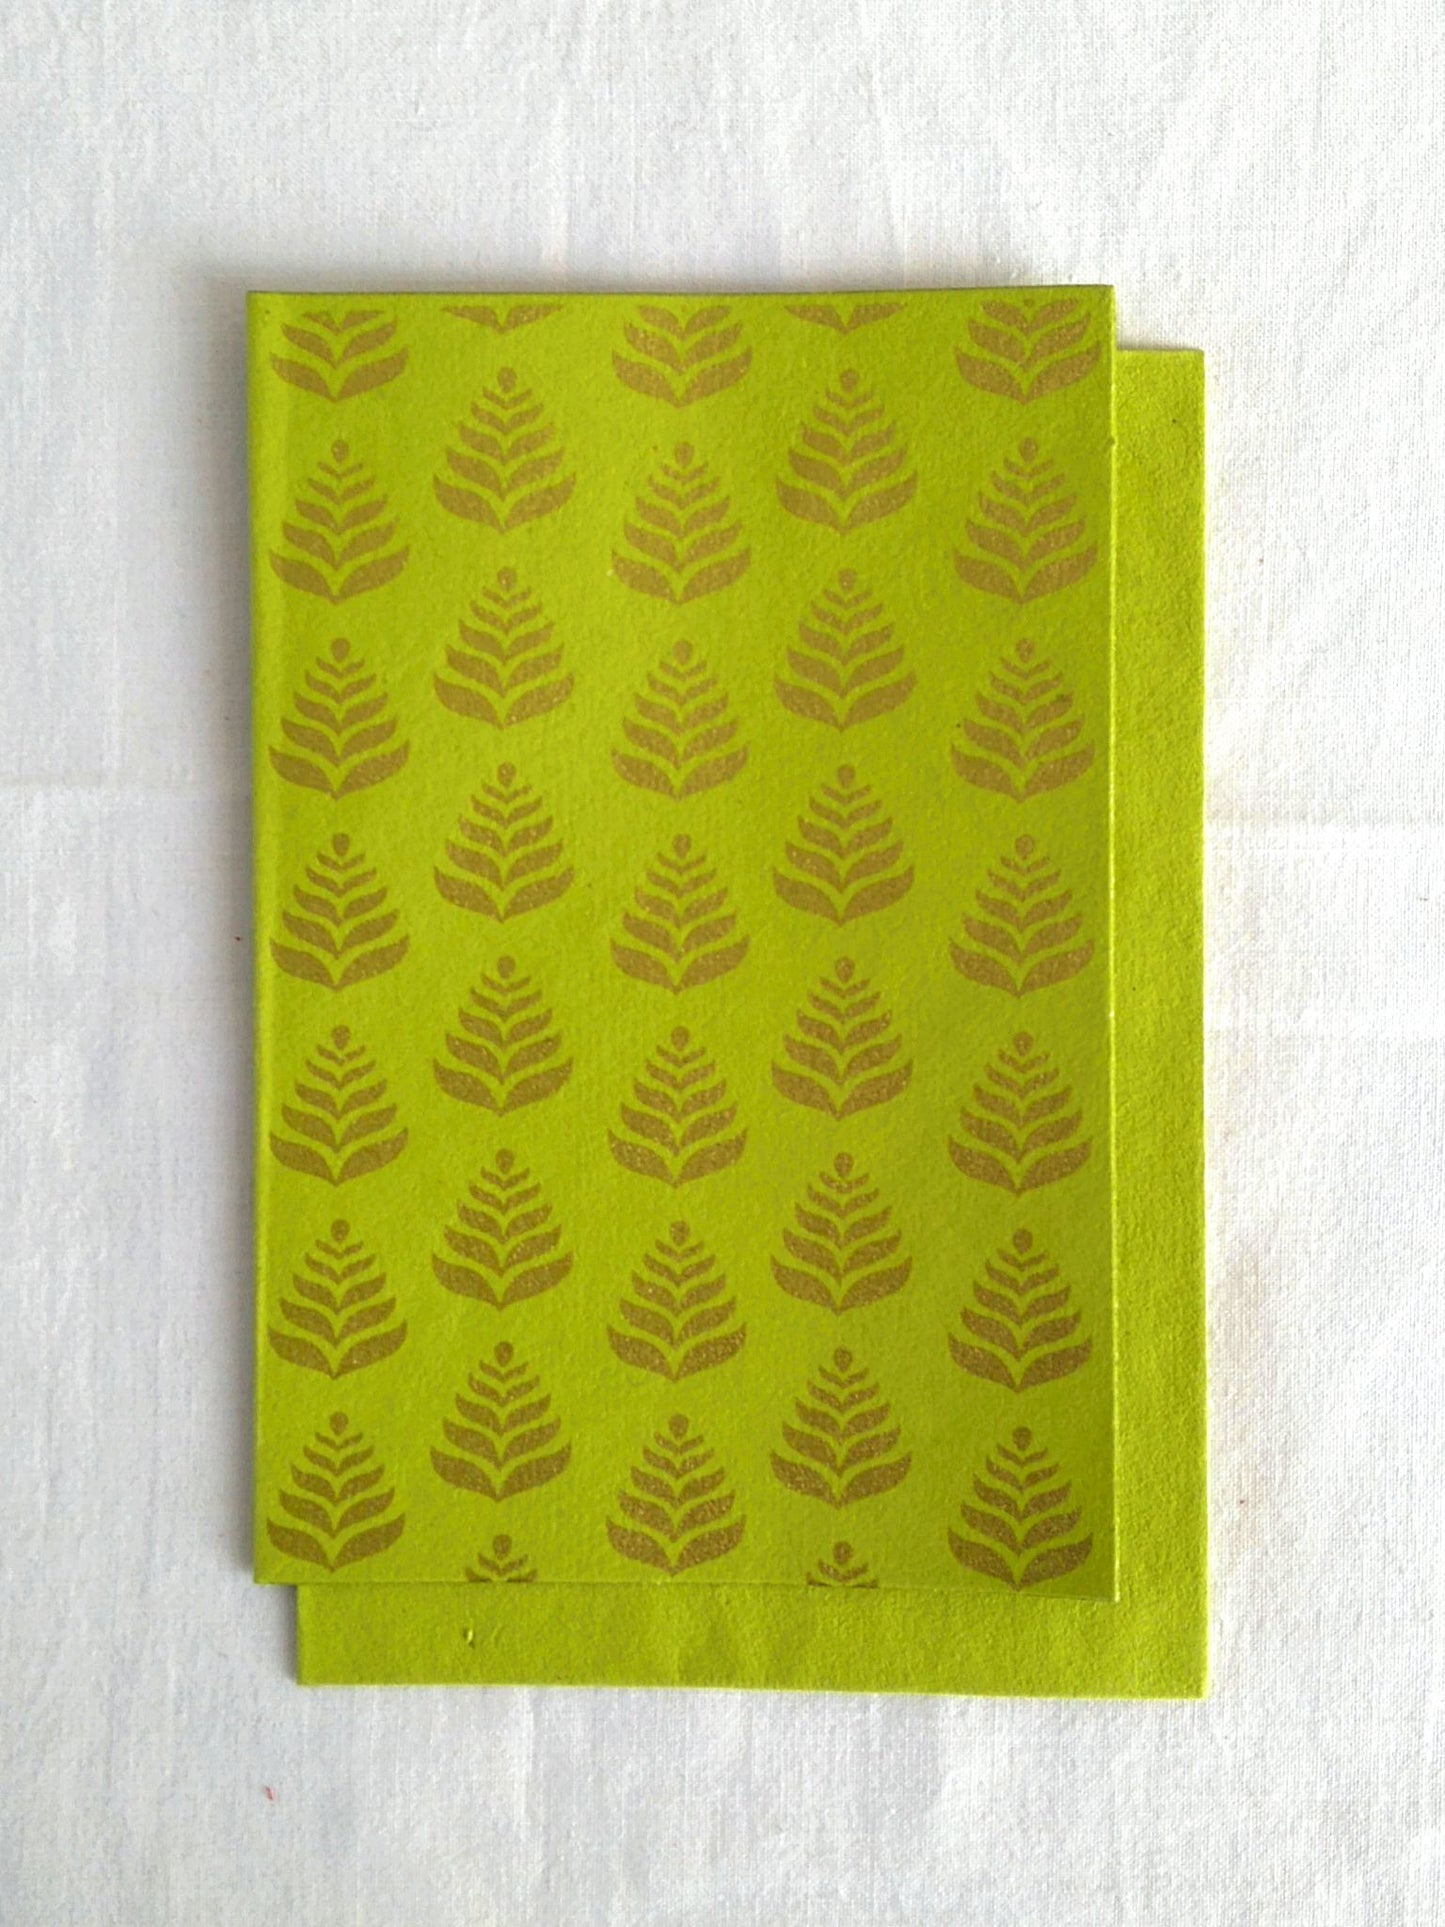 Chartreuse Lime - Set of 5 Gold Fern Motif Hand Block Printed Cards - An Indian Summer